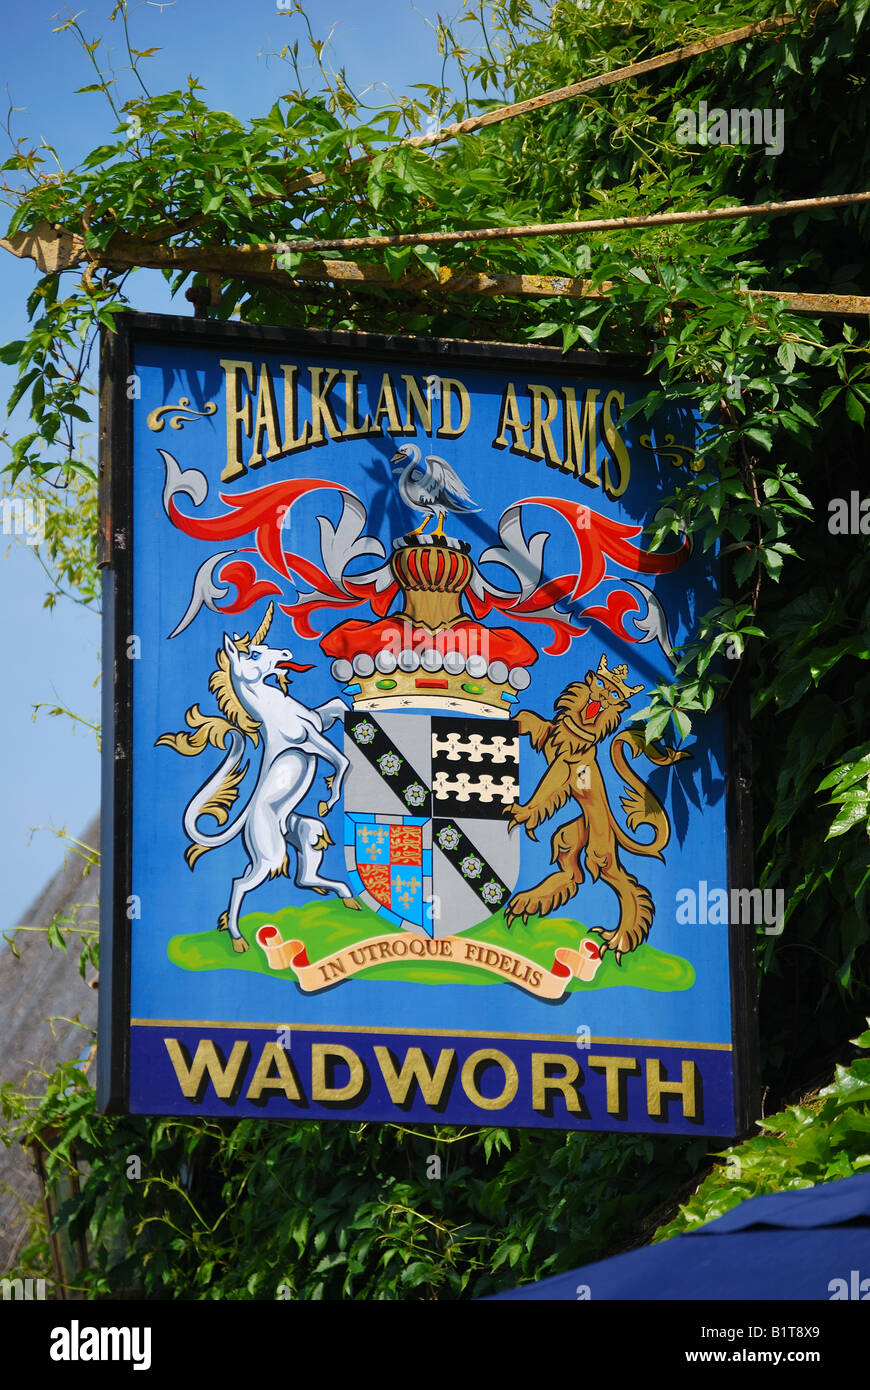 The Falkland Arms sign, Great Tew, Oxfordshire, England, United Kingdom Stock Photo